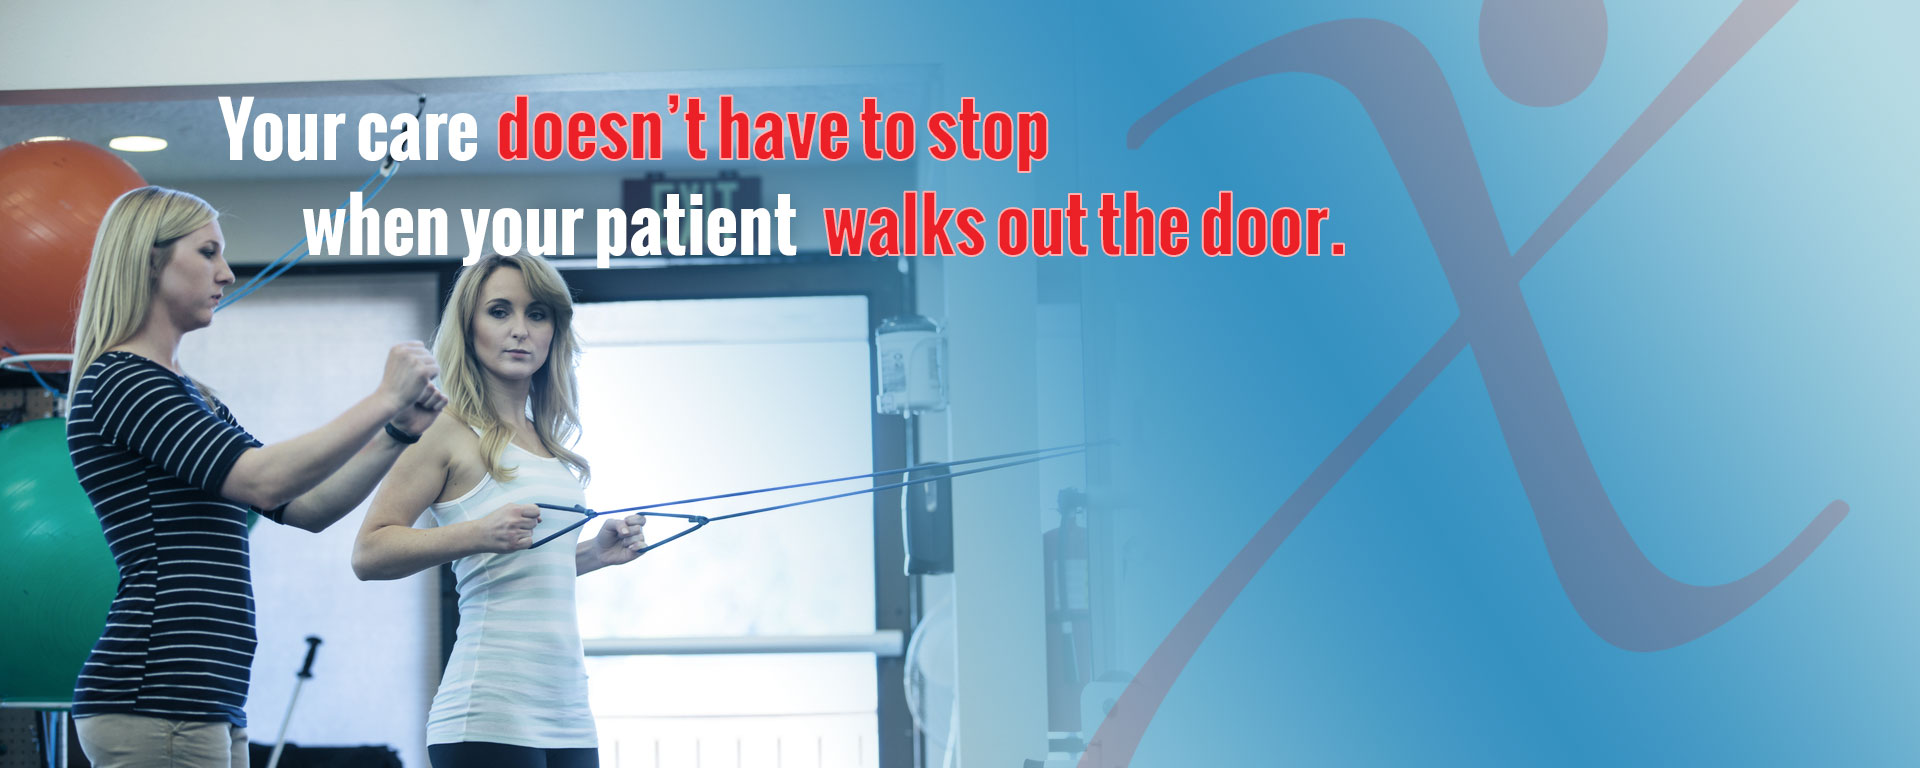 Your care doesn't have to stop when your patient walks out the door